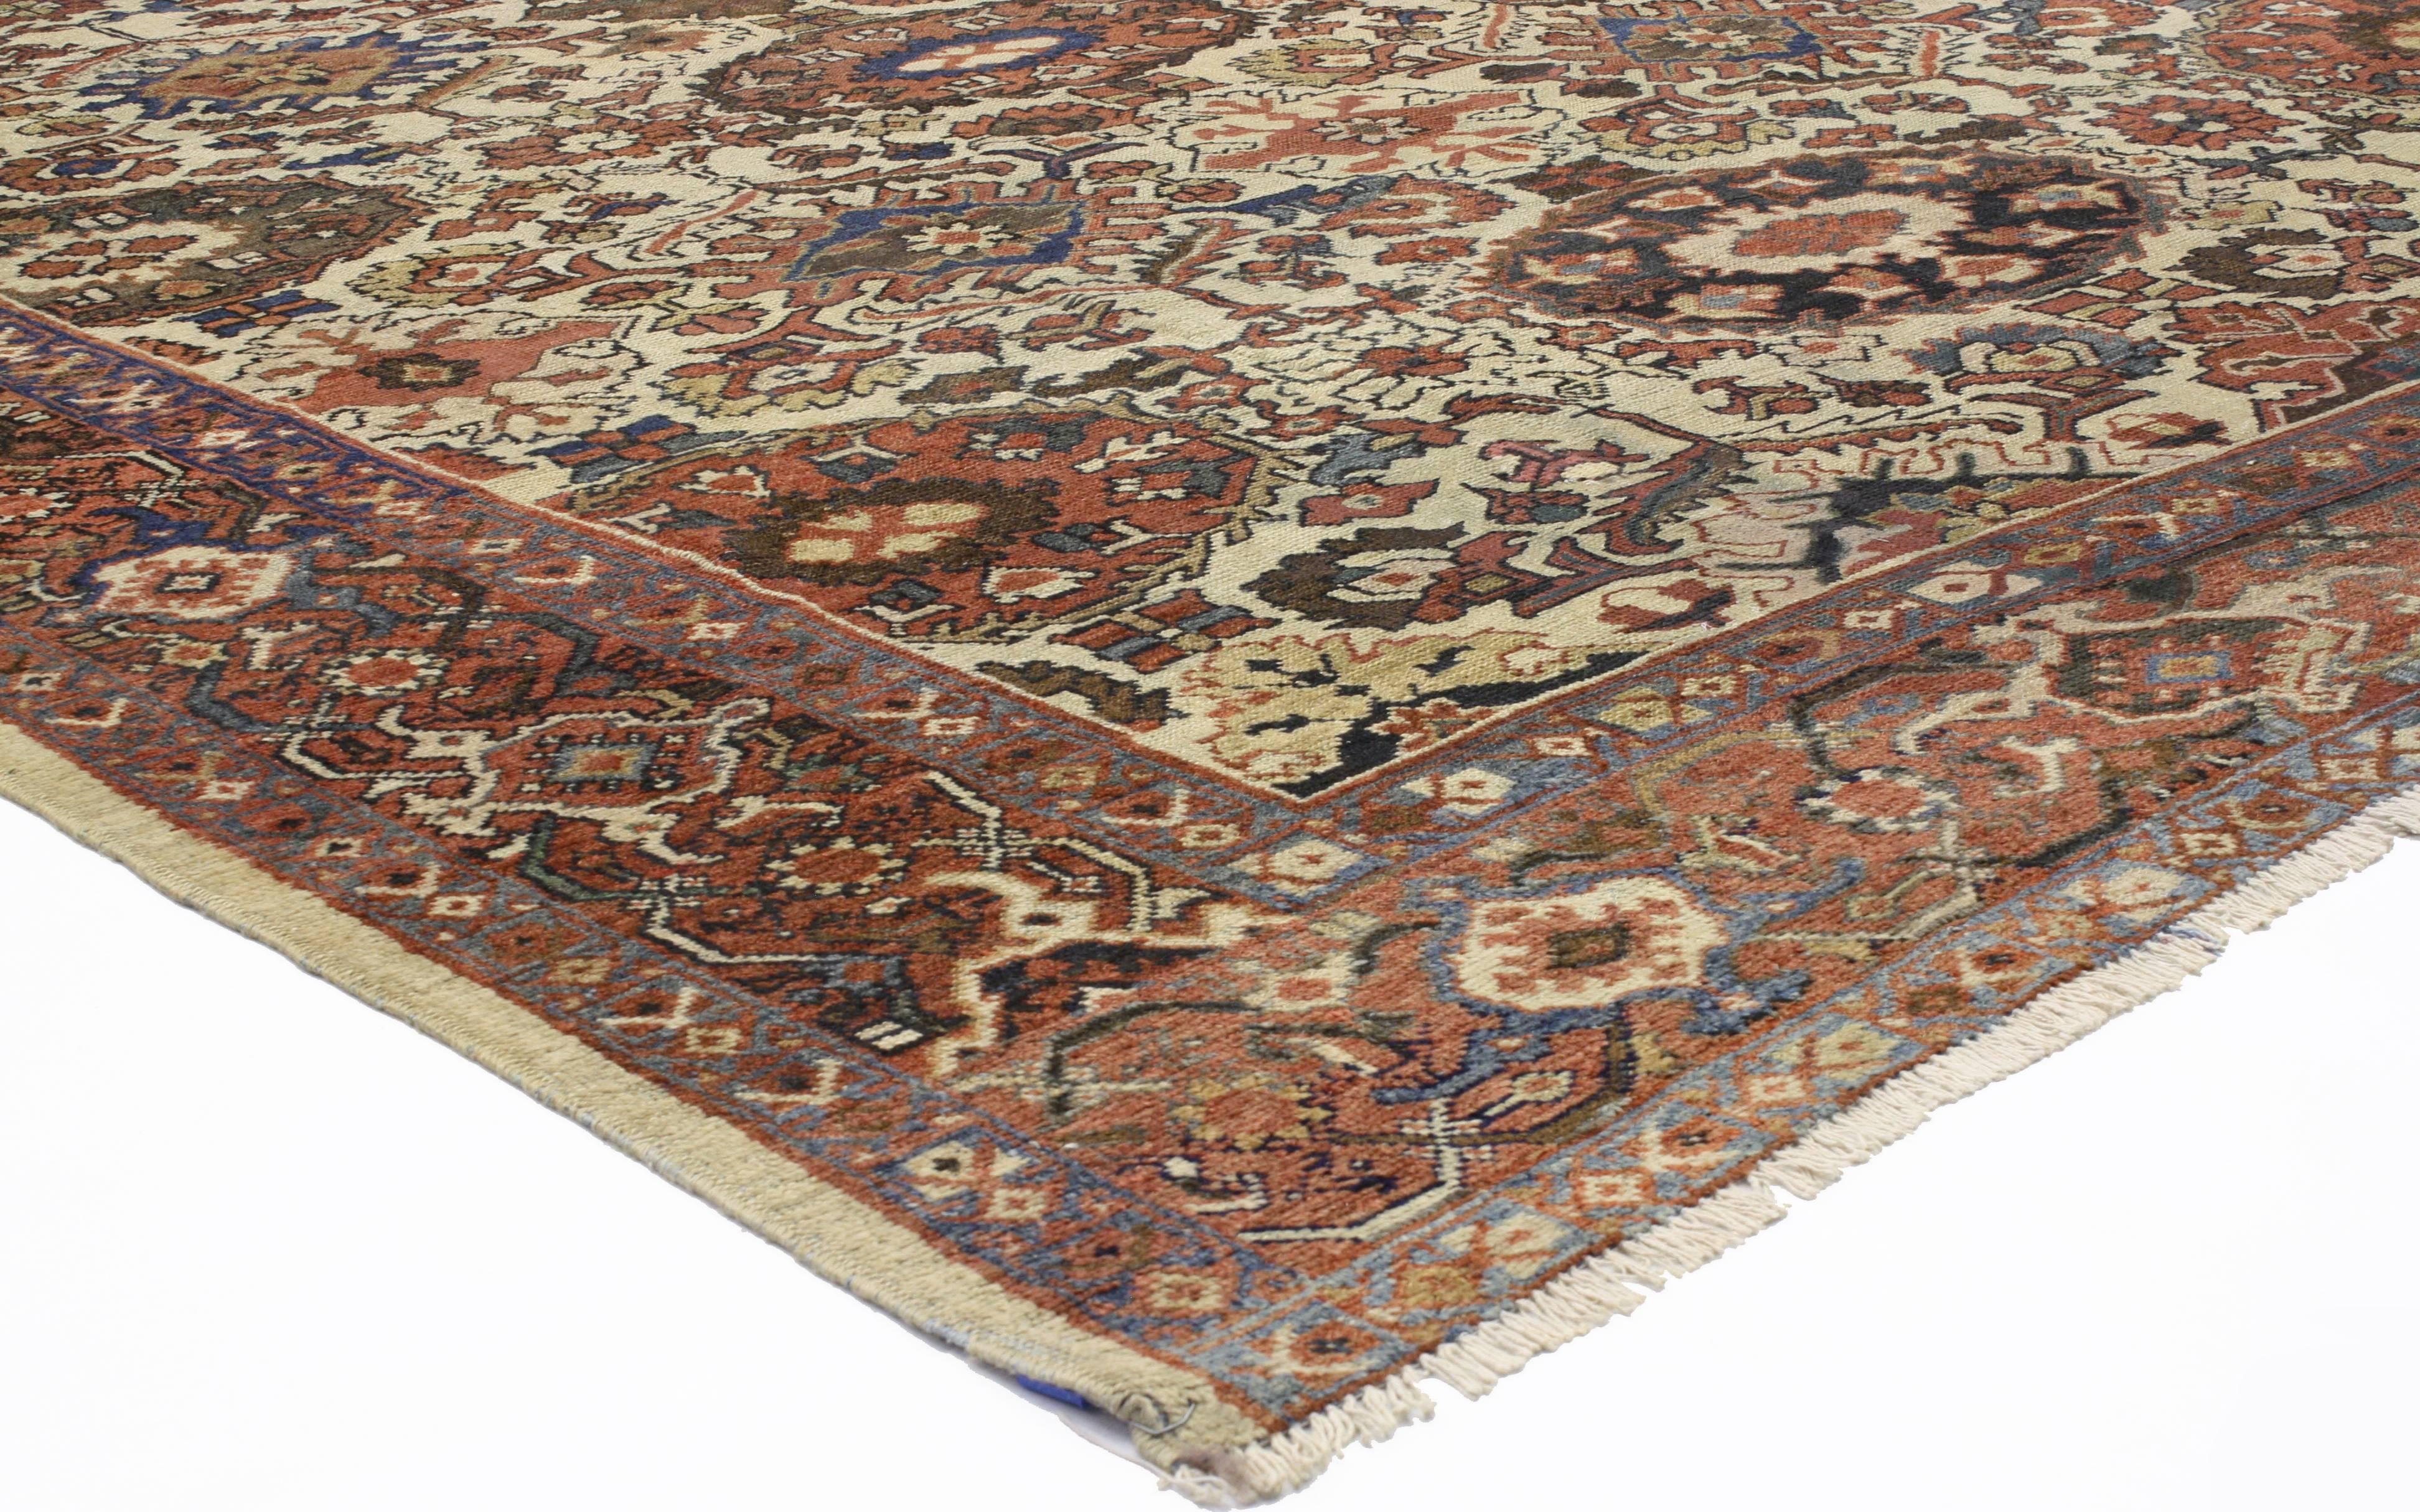 72575, antique Persian Mahal rug with Rustic American Colonial style. Warm and inviting with a timeless design, this hand knotted wool antique Persian Mahal rug features a large-scale all-over geometric botanical pattern composed of palmettes,